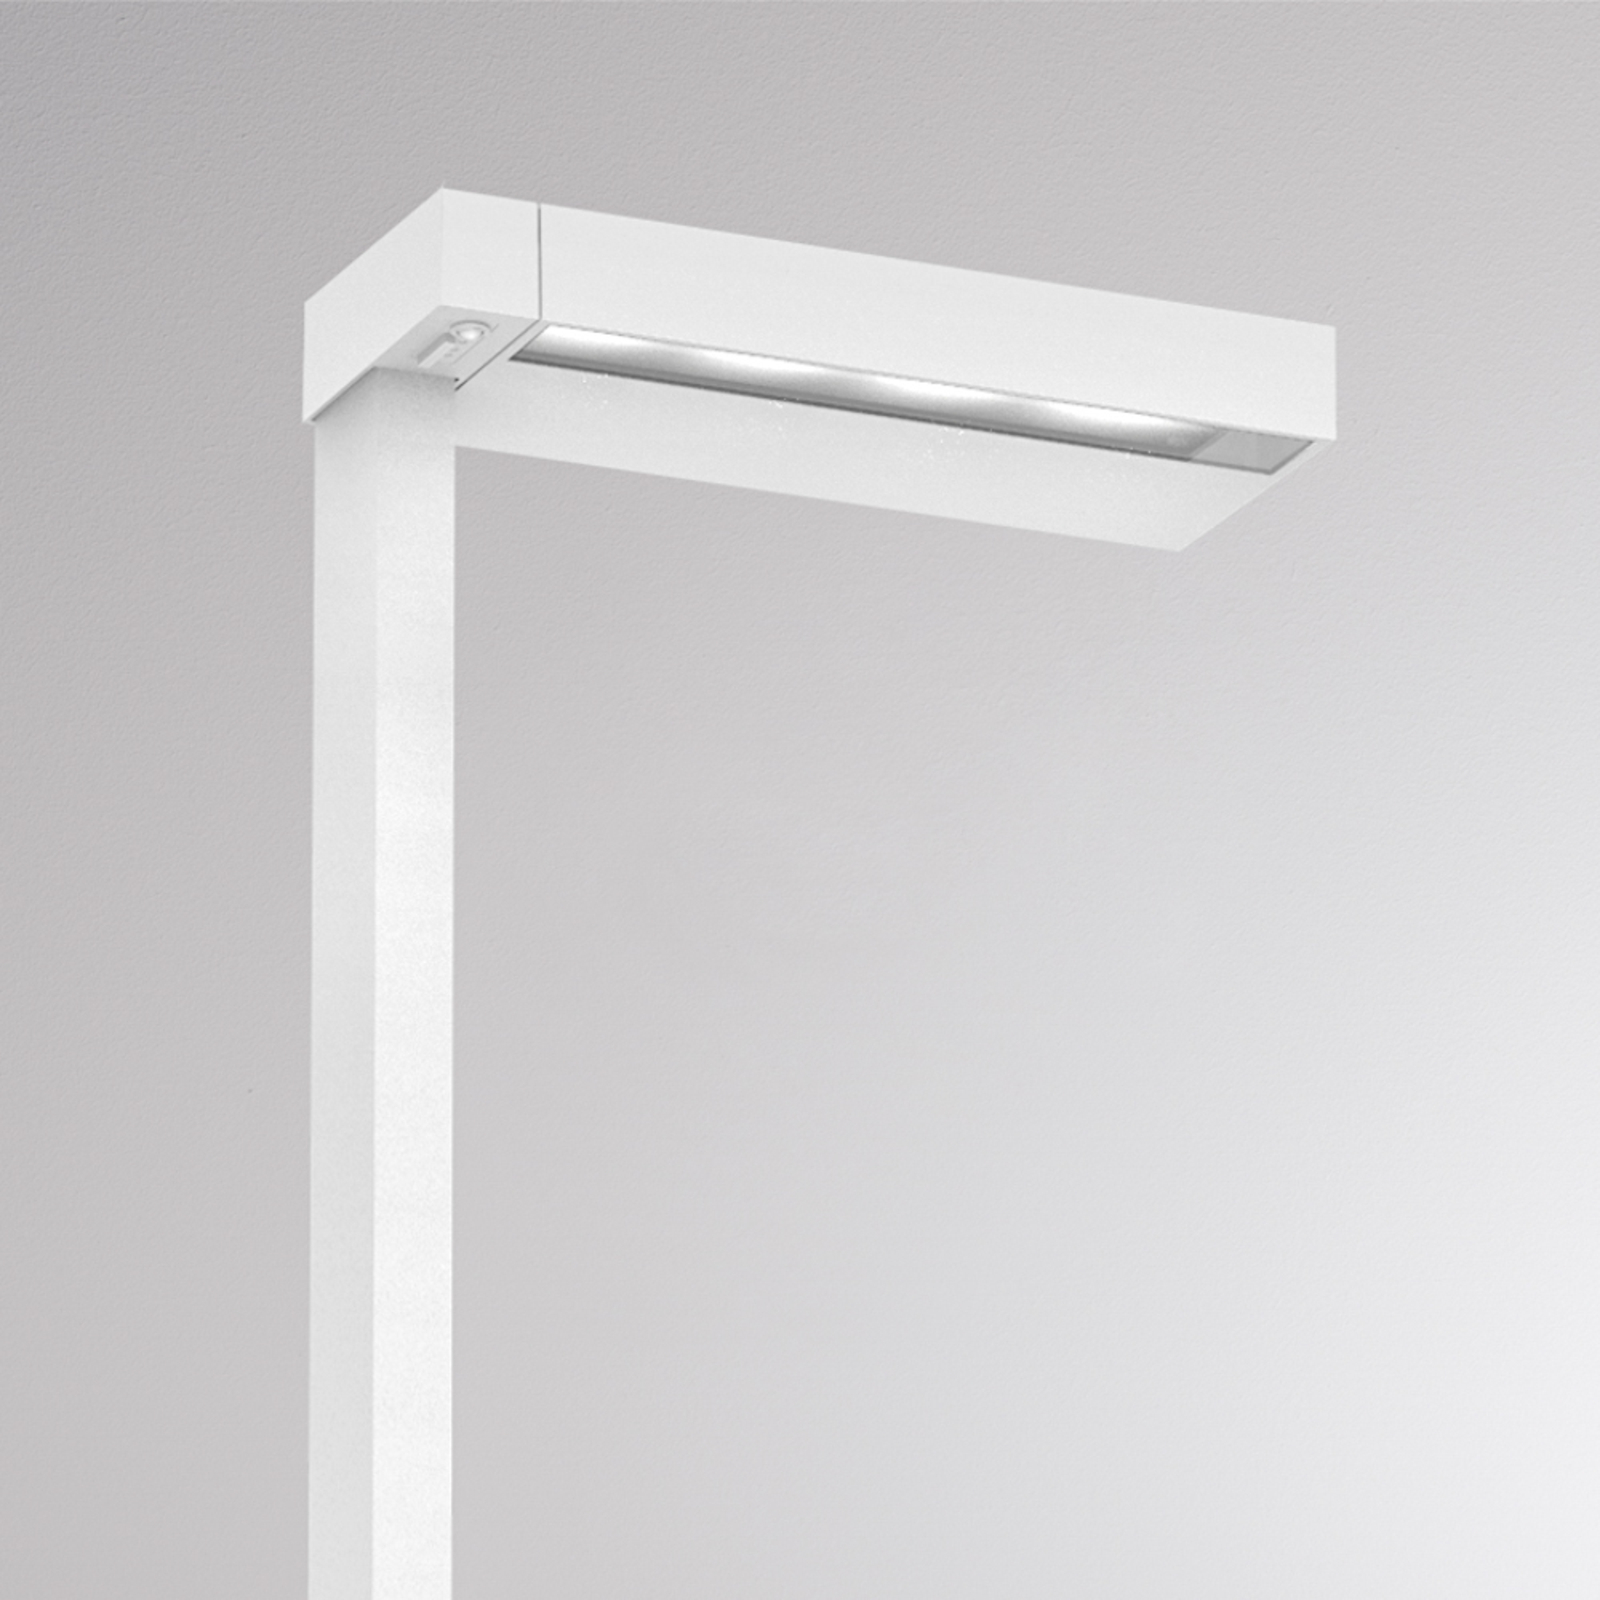 Molto Luce Concept Right F floor lamp dimmer white